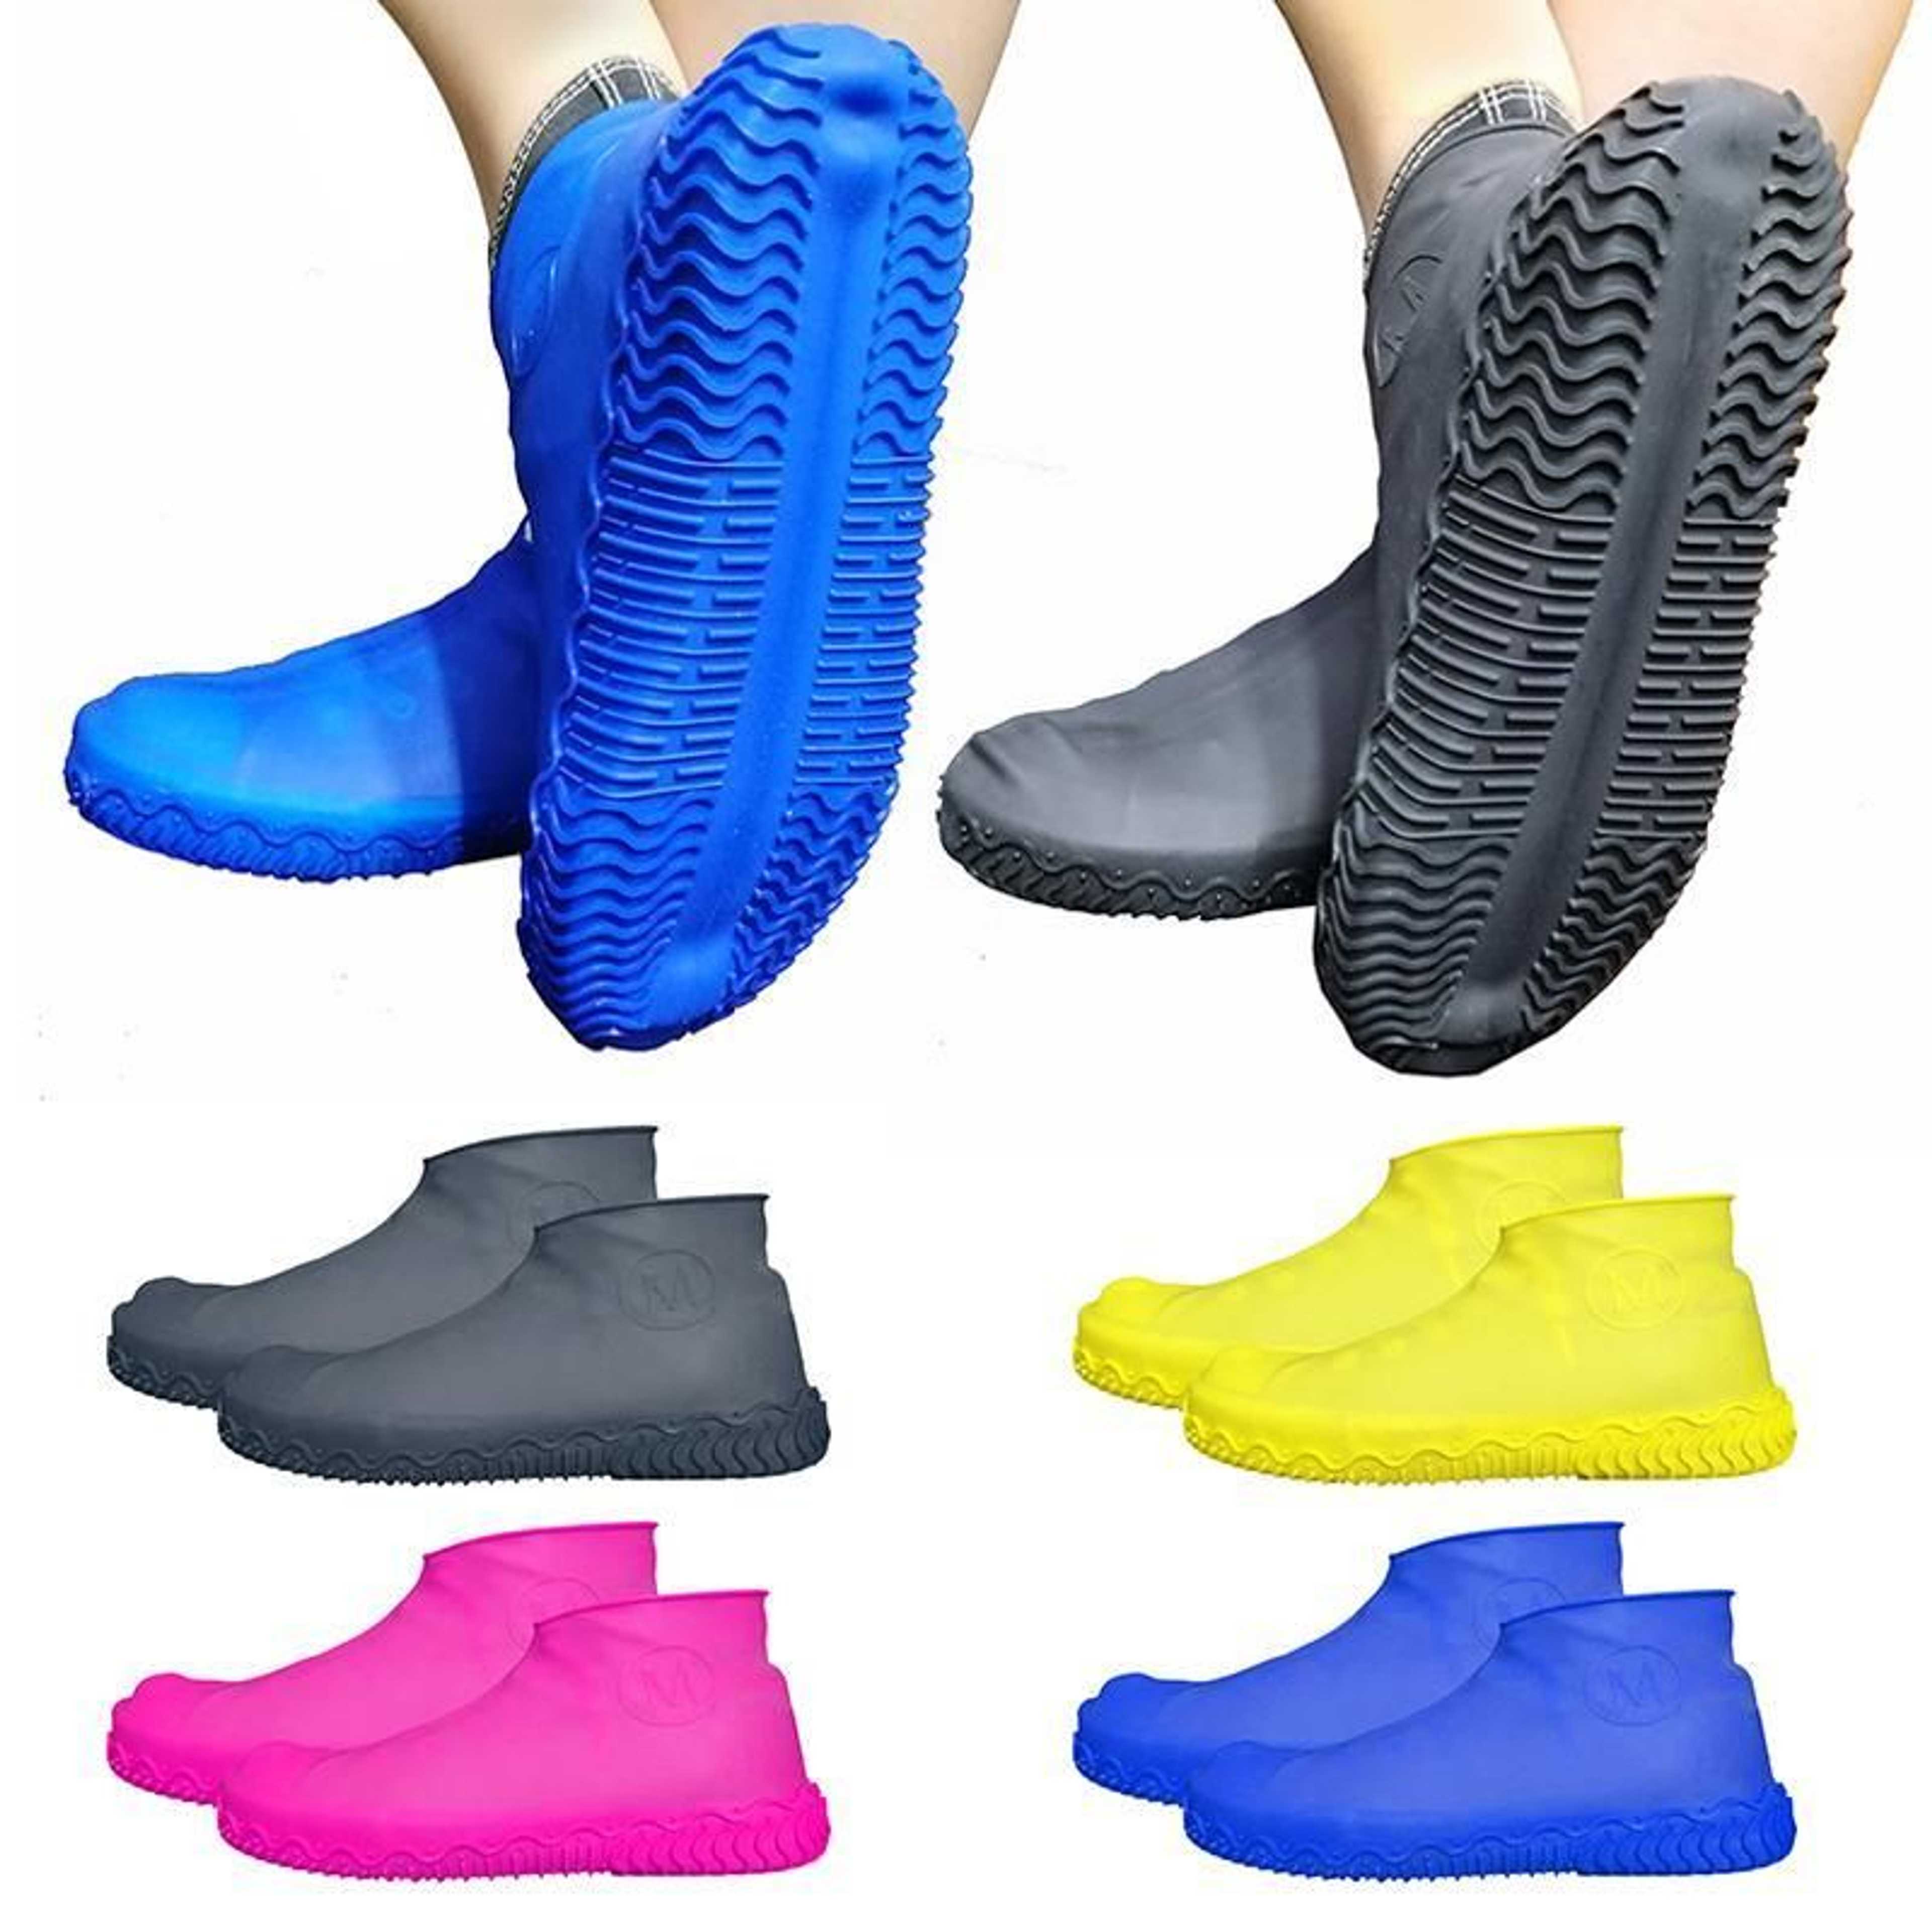 Silicon Shoe Cover Water Proof for Rain Protection Water Protection 1 Pair